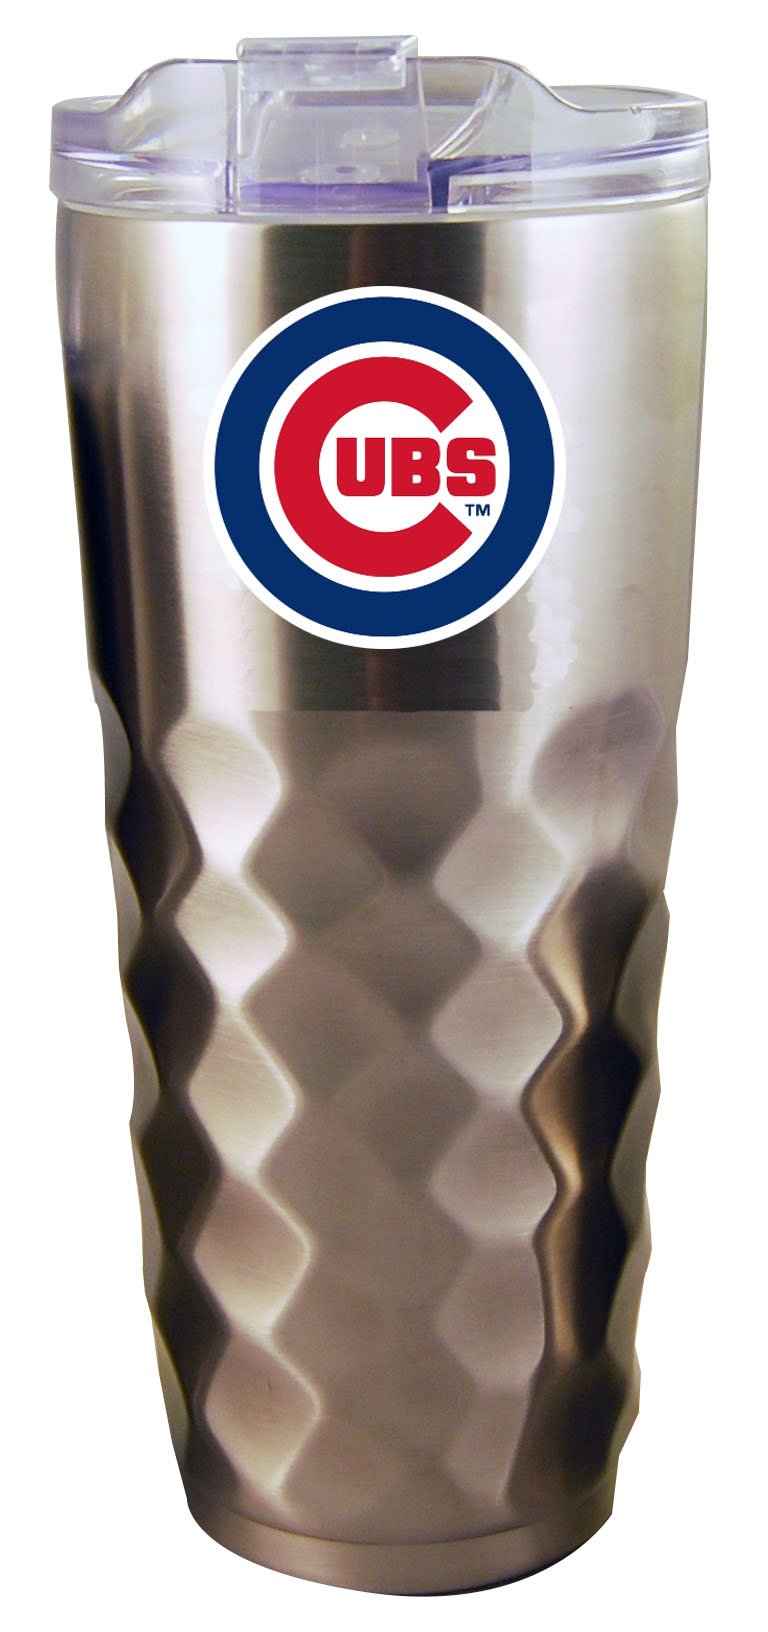 32oz Stainless Steel Diamond Tumbler | Chicago Cubs
CCU, Chicago Cubs, CurrentProduct, Drinkware_category_All, MLB
The Memory Company